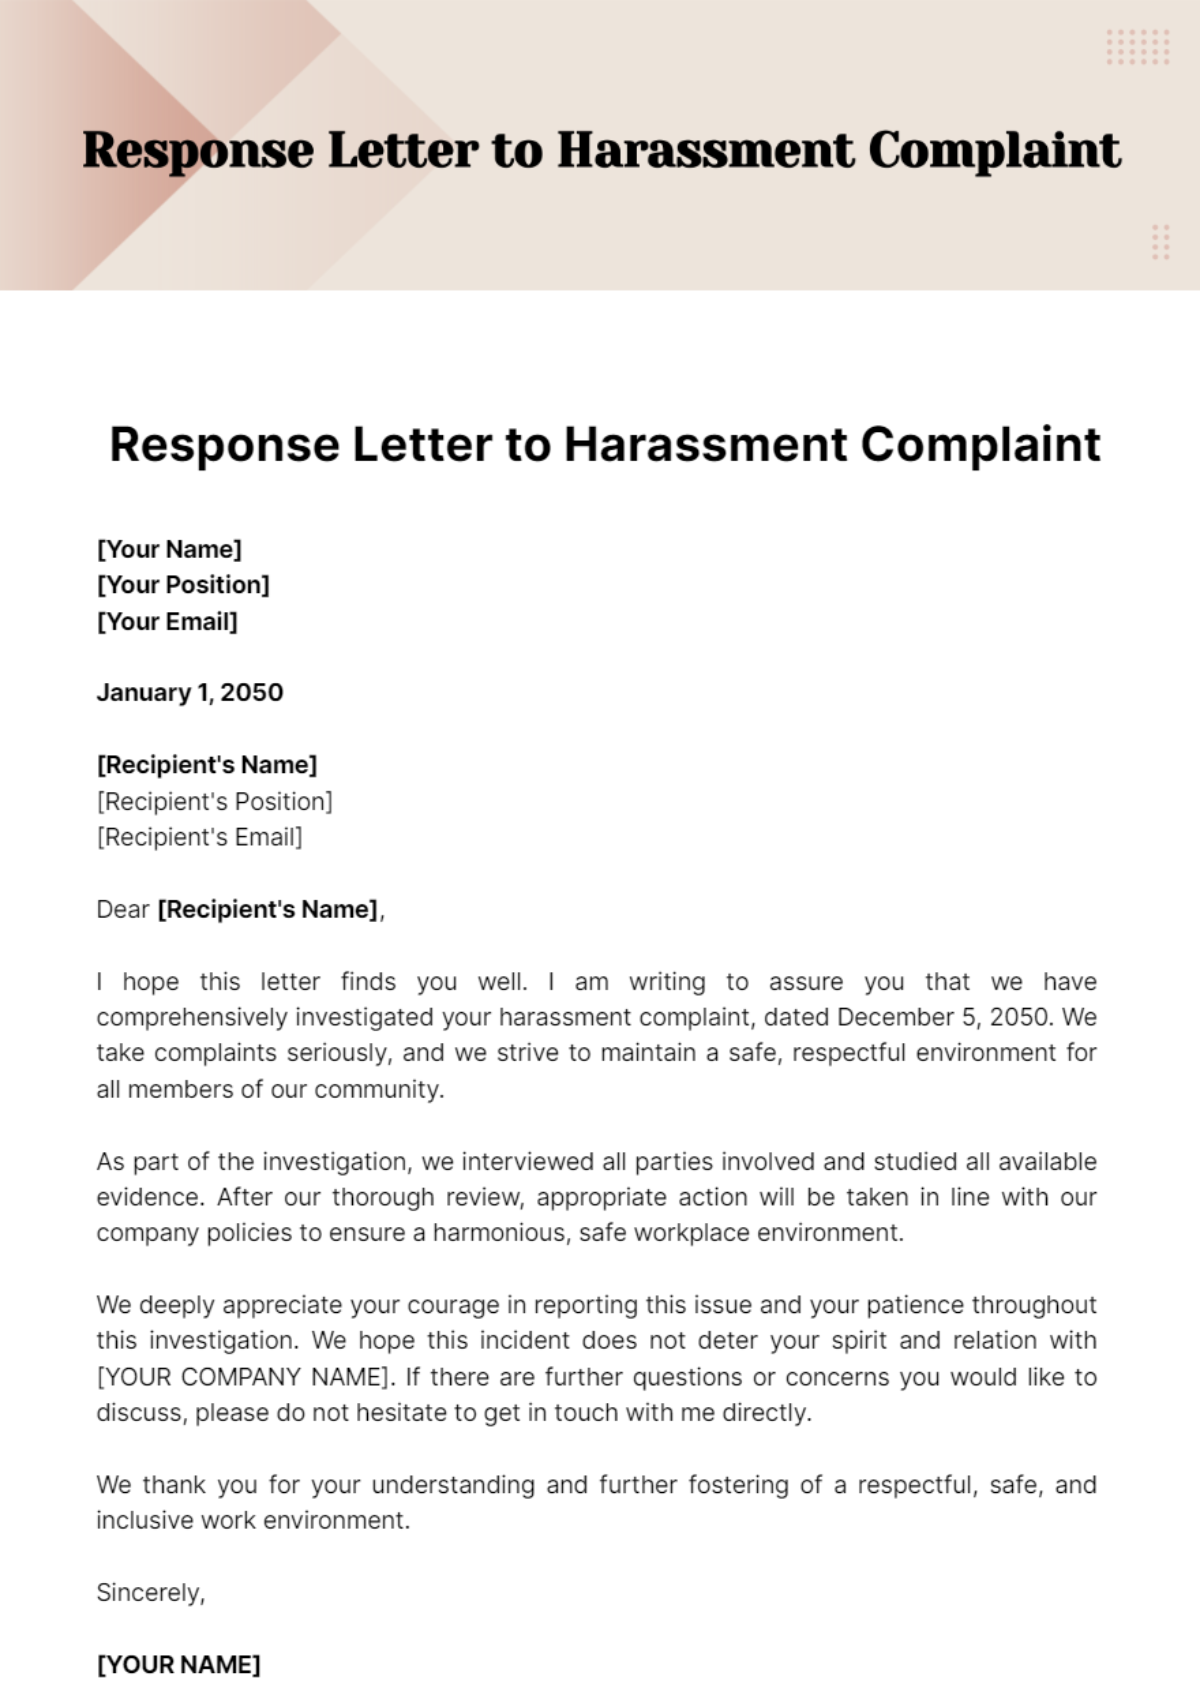 Free Response Letter to Harassment Complaint Template